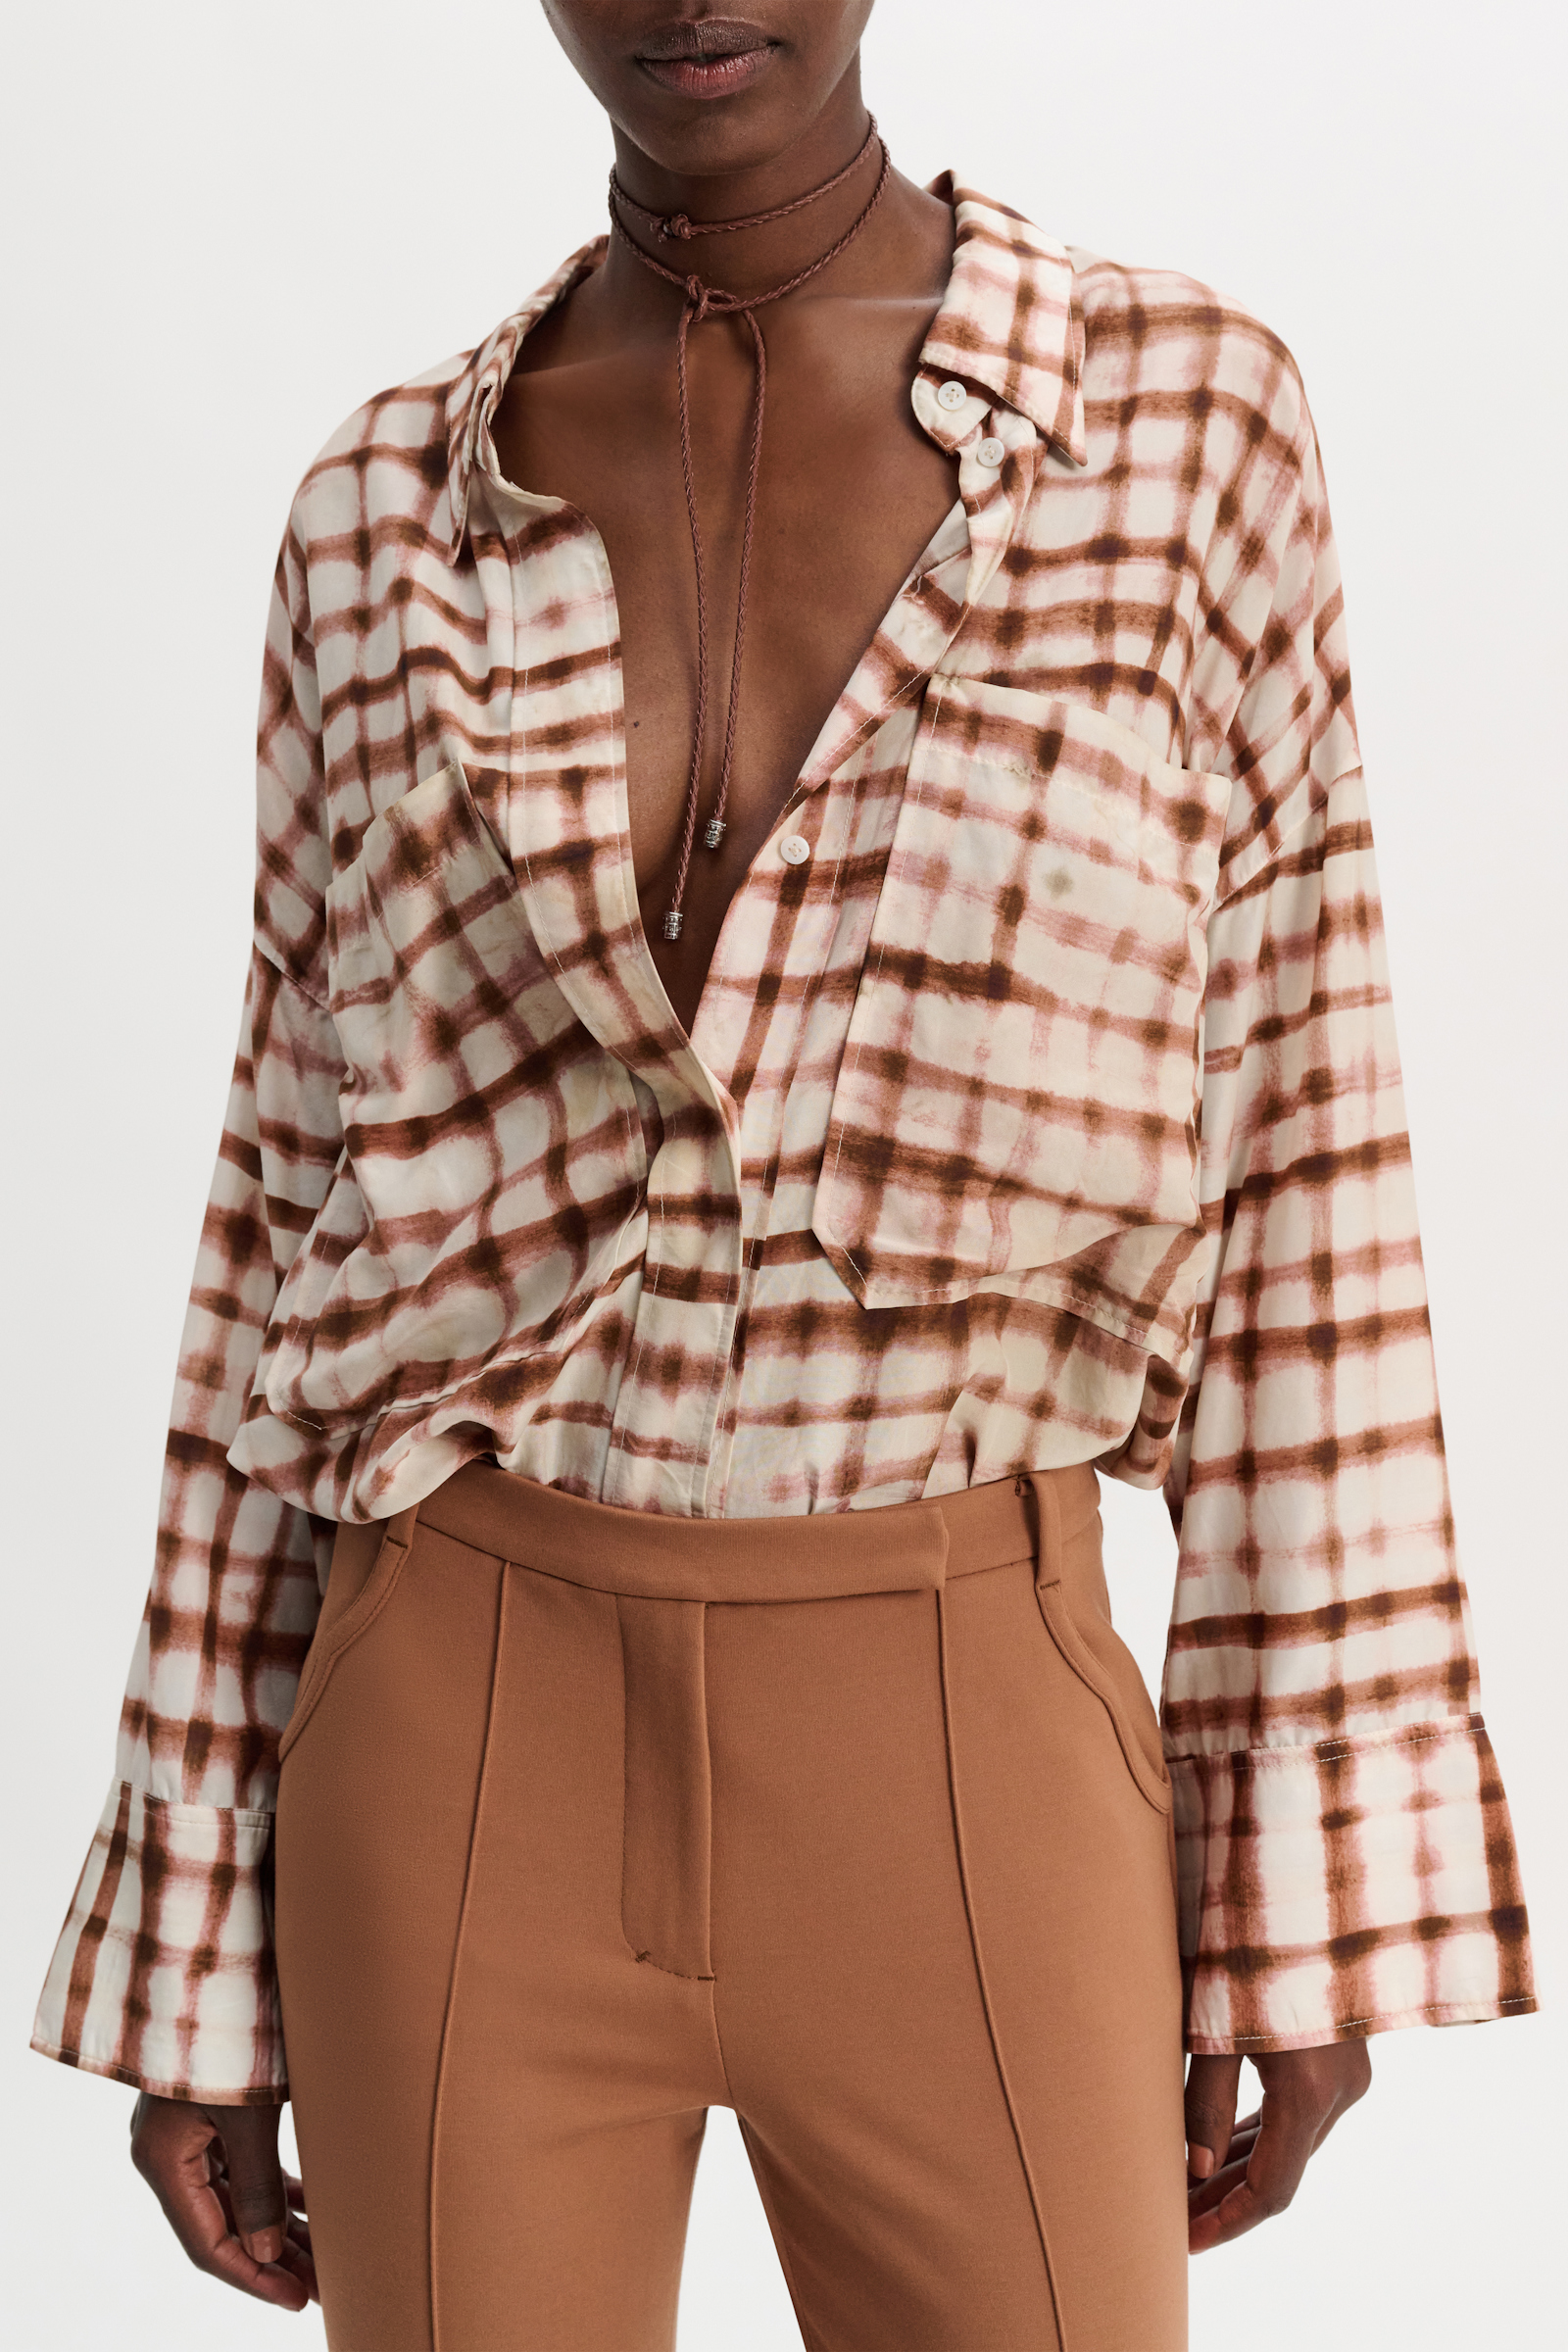 Dorothee Schumacher Cropped flared pants in Punto Milano with Western details brown